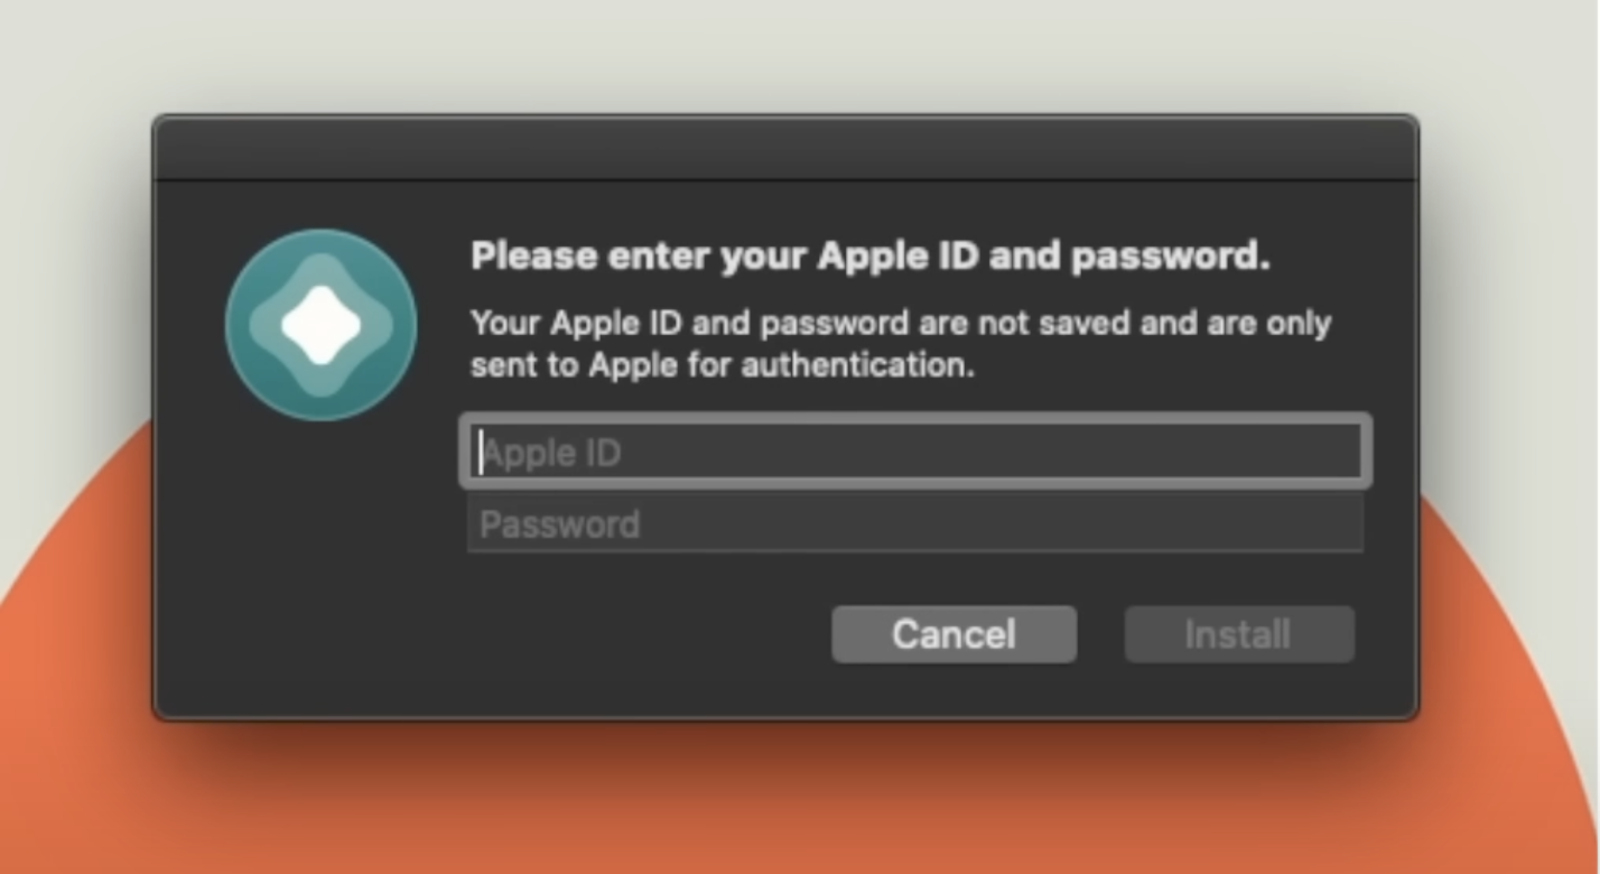 Screenshot of the Apple ID and password prompt while installing AltStore to sideload apps on iPhone